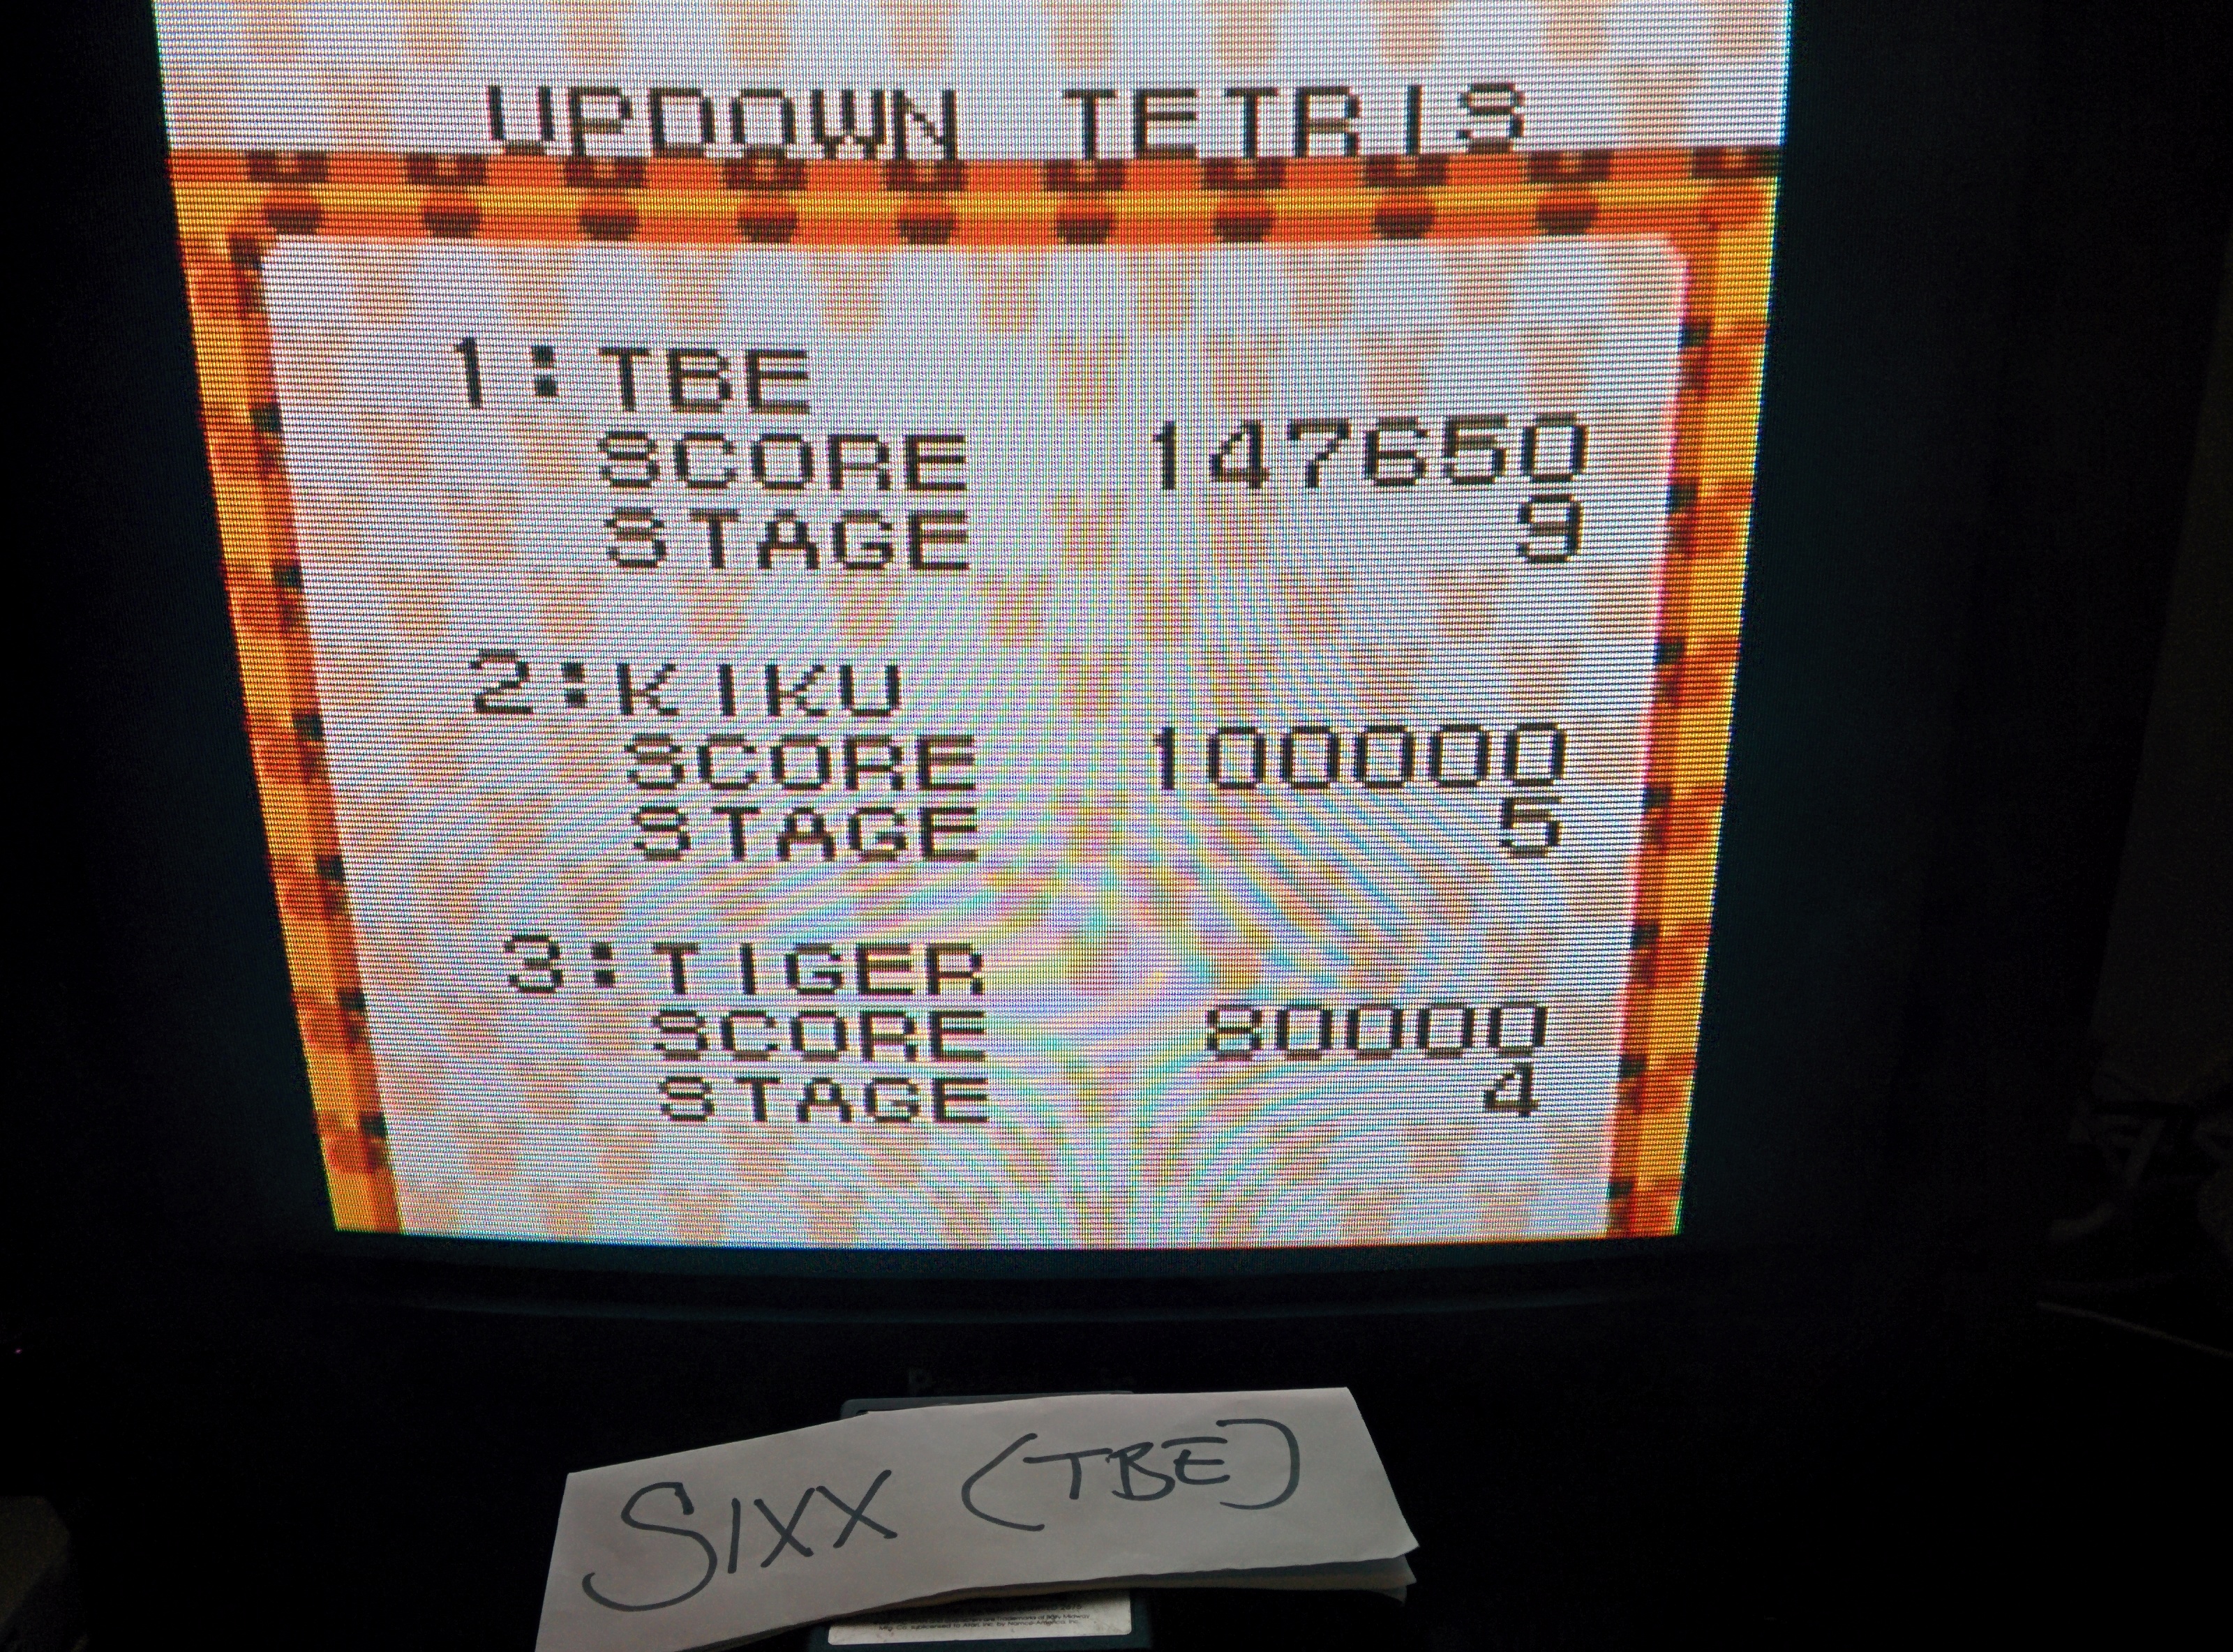 Sixx: Magical Tetris Challenge: Updown Tetris [Normal Difficulty] (Game Boy Color Emulated) 147,650 points on 2014-07-15 17:06:57